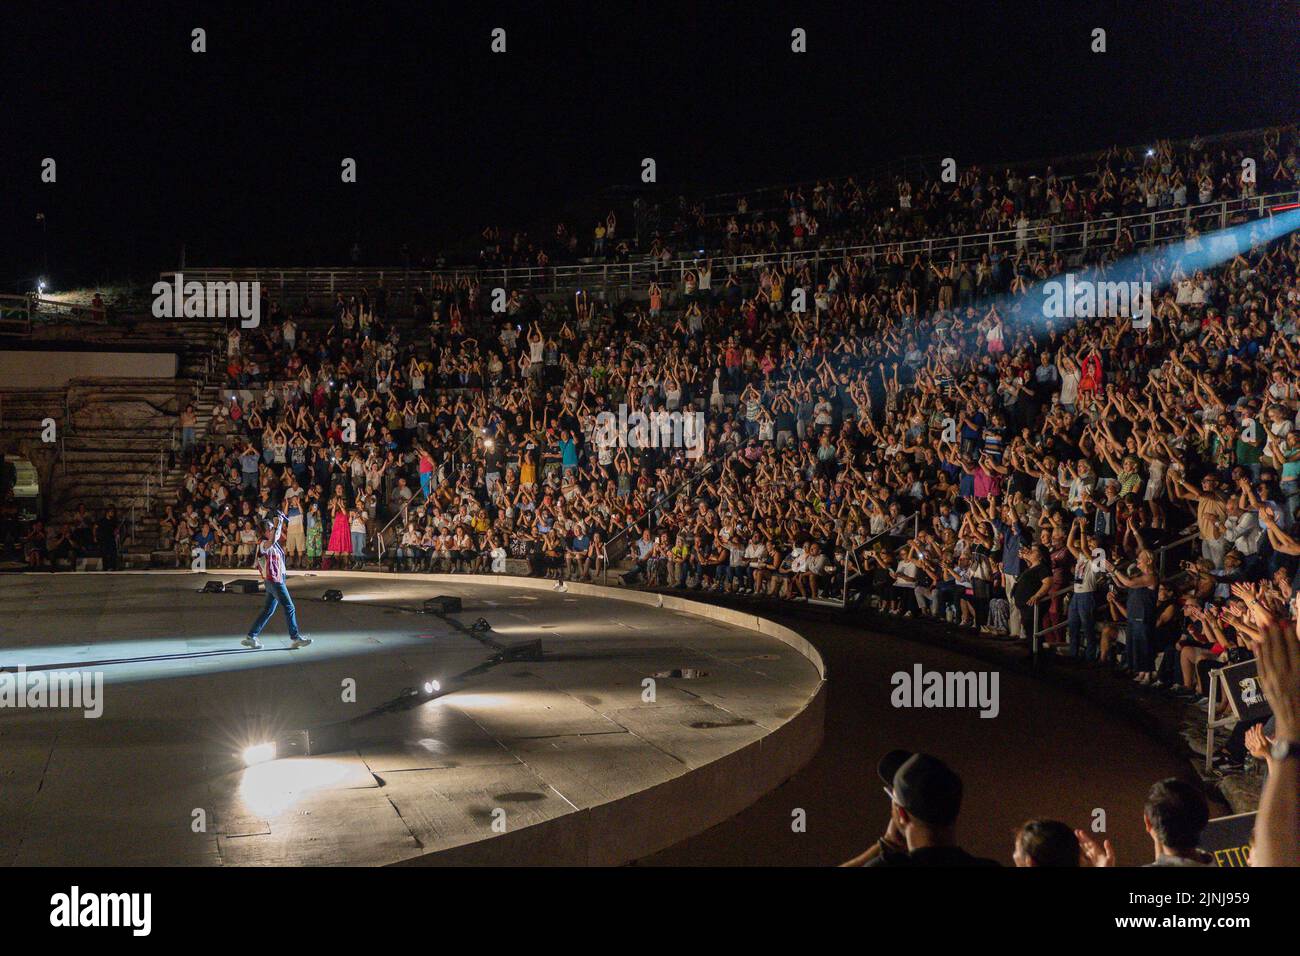 Siracusa, Italy. 11th Aug, 2022. Gianna Nannini and her musicists performing on theatre during Gianna Nannini - Estate 2022, Italian singer Music Concert in Siracusa, Italy, August 11 2022 Credit: Independent Photo Agency/Alamy Live News Stock Photo